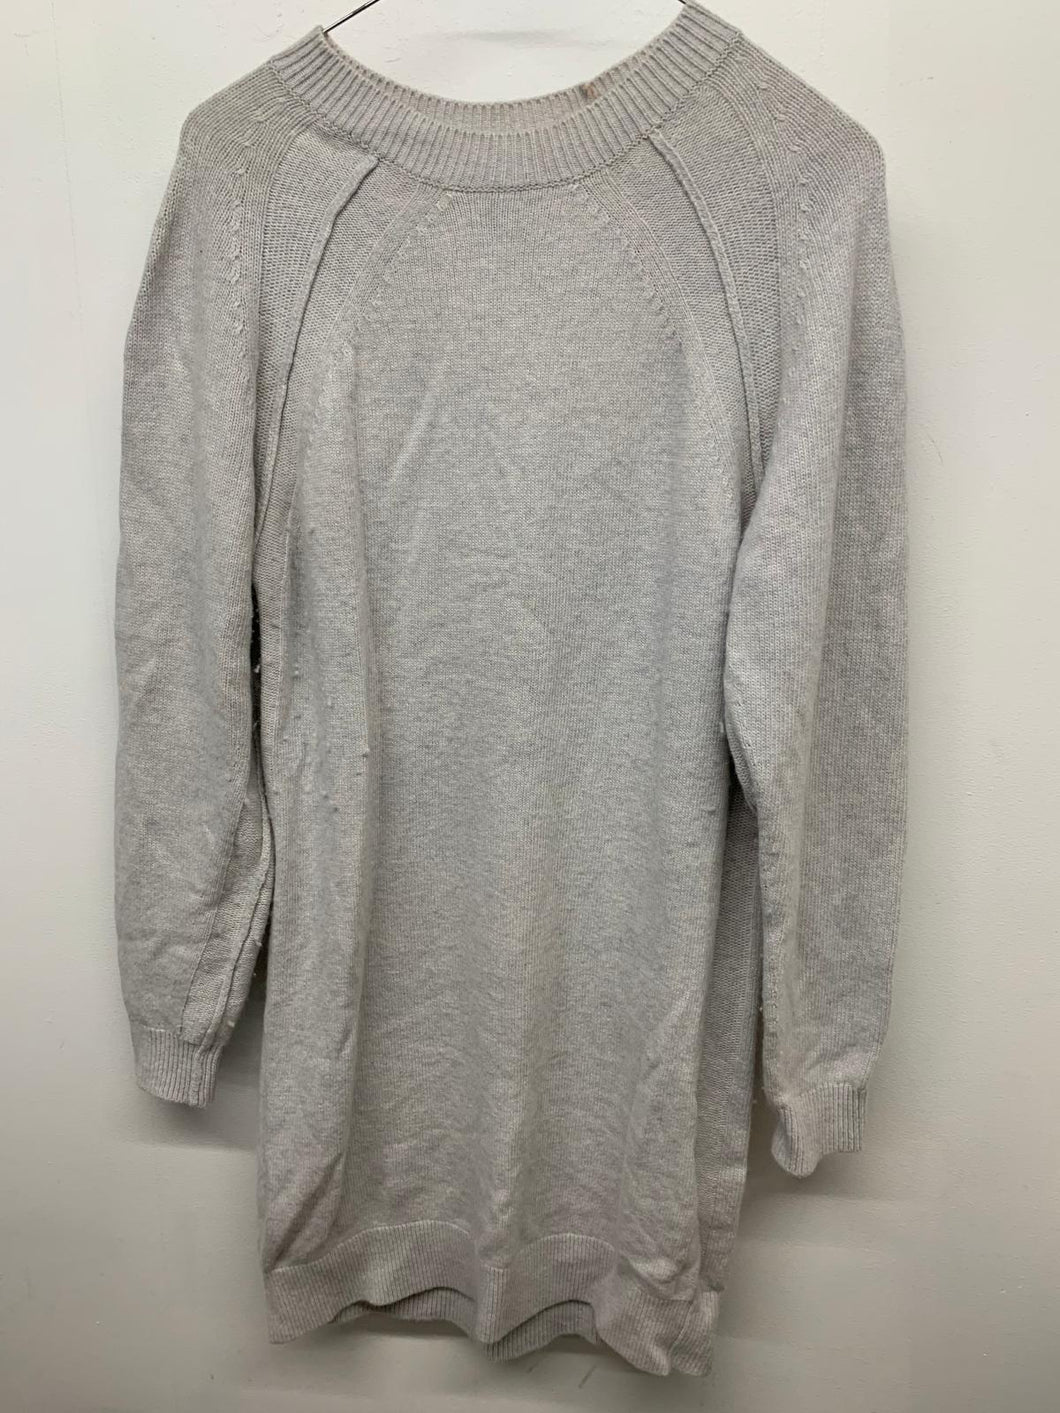 REISS Ladies Grey Dresses  Knitted Stretch Long Sleeve Dress UK 4